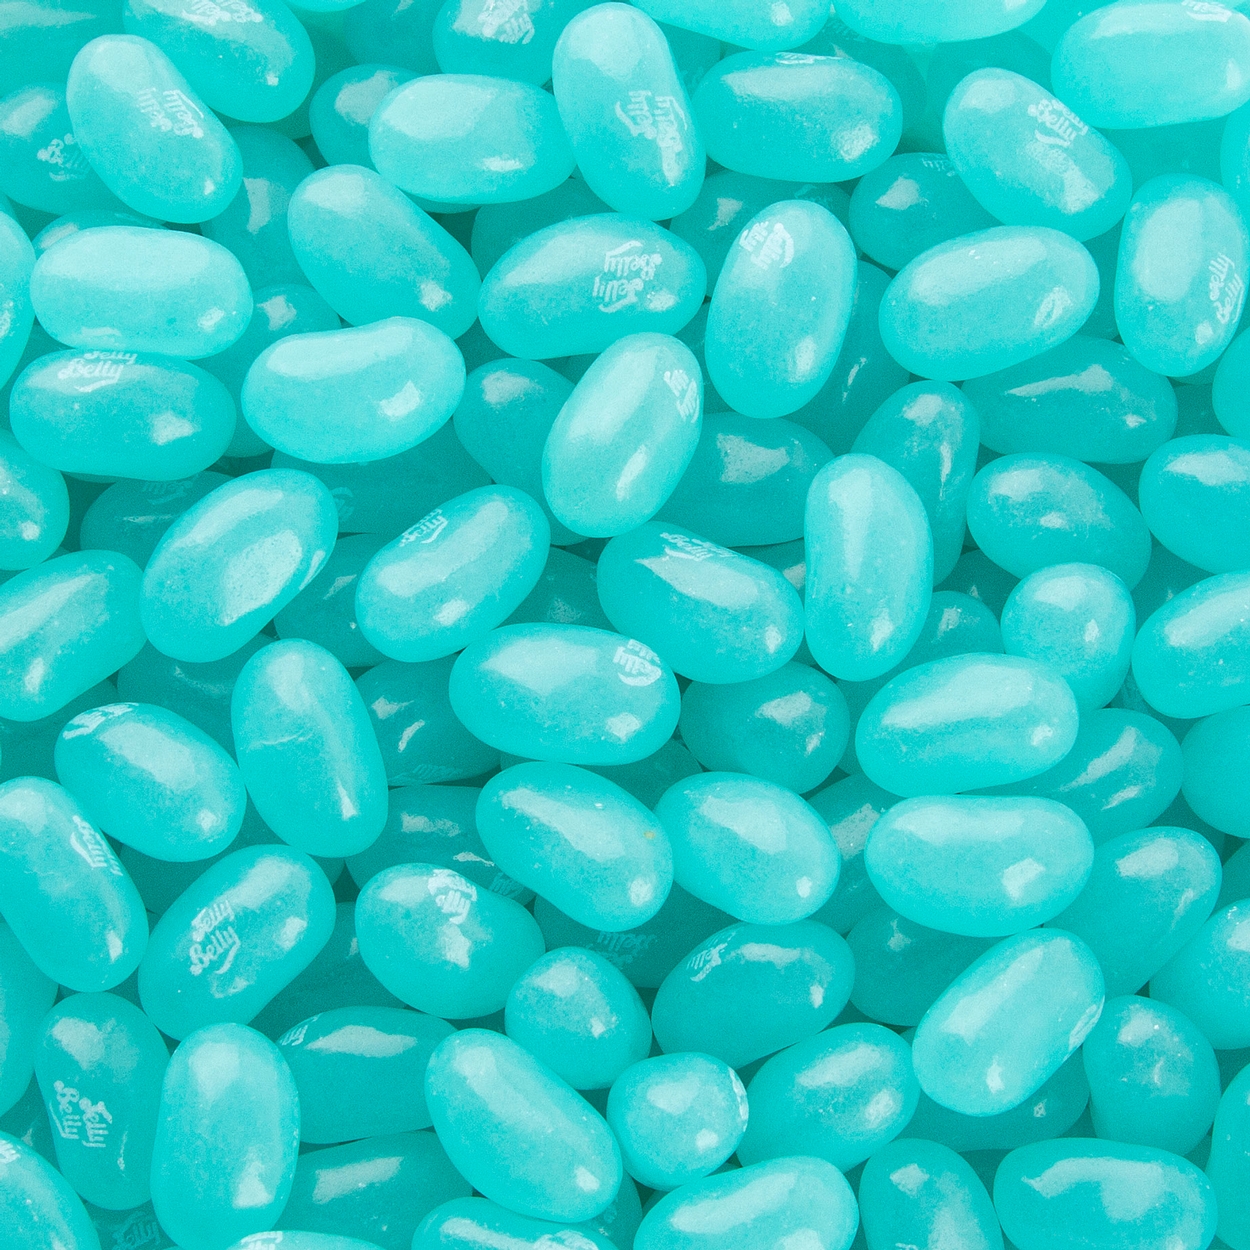 2lbs Light Blue Jelly Beans Candy - Blue Raspberry (approximately 800 Pcs)